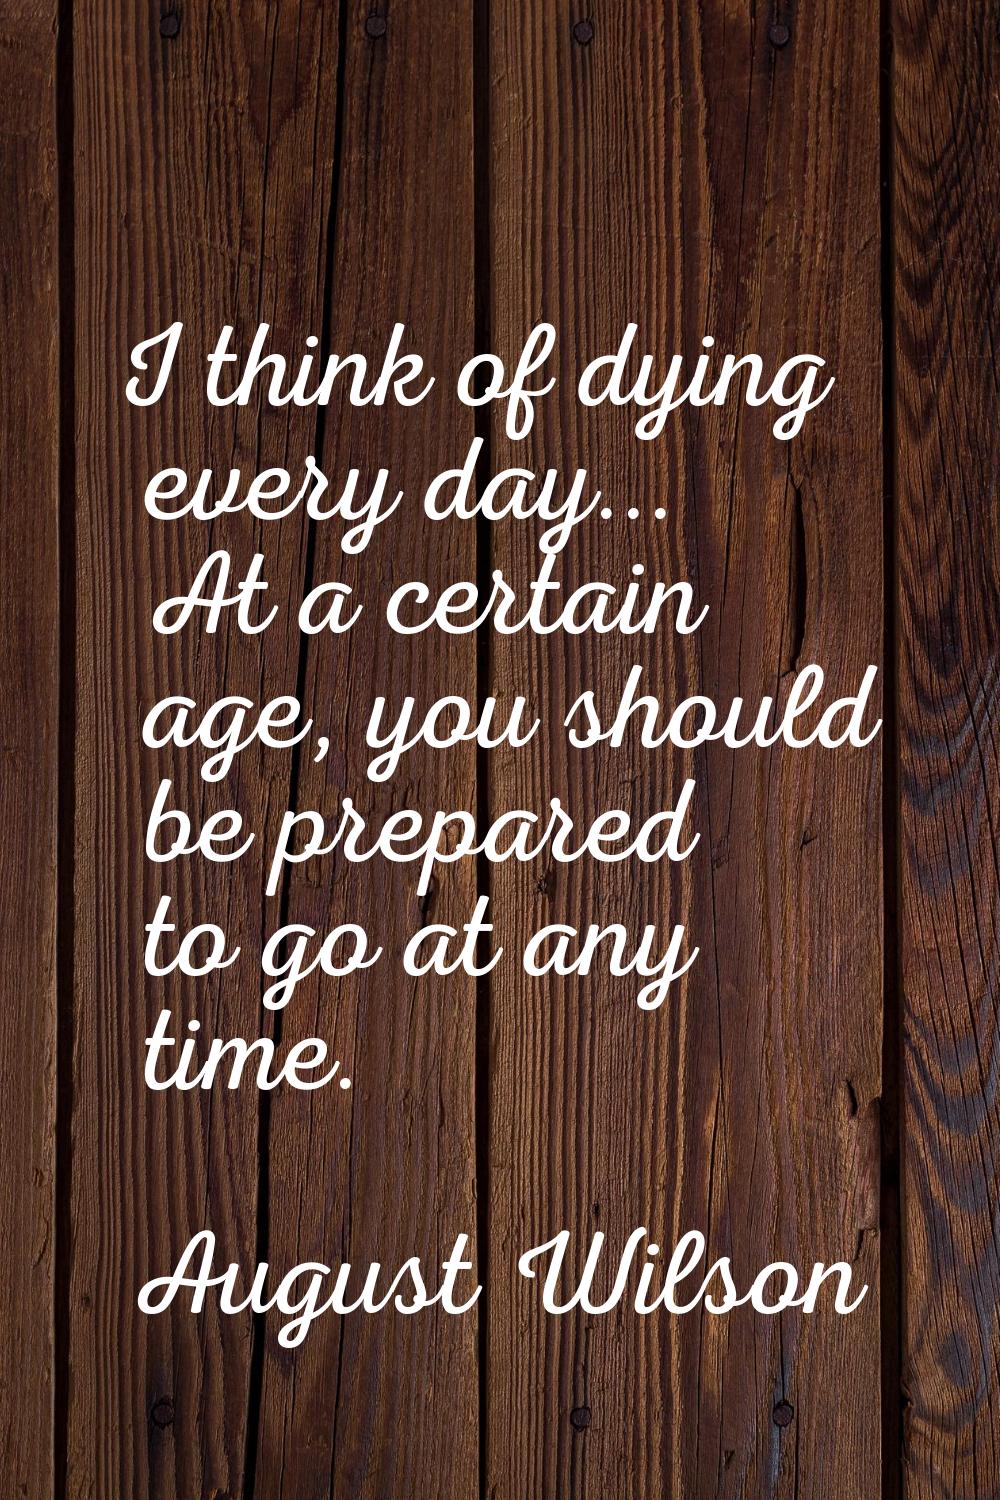 I think of dying every day... At a certain age, you should be prepared to go at any time.